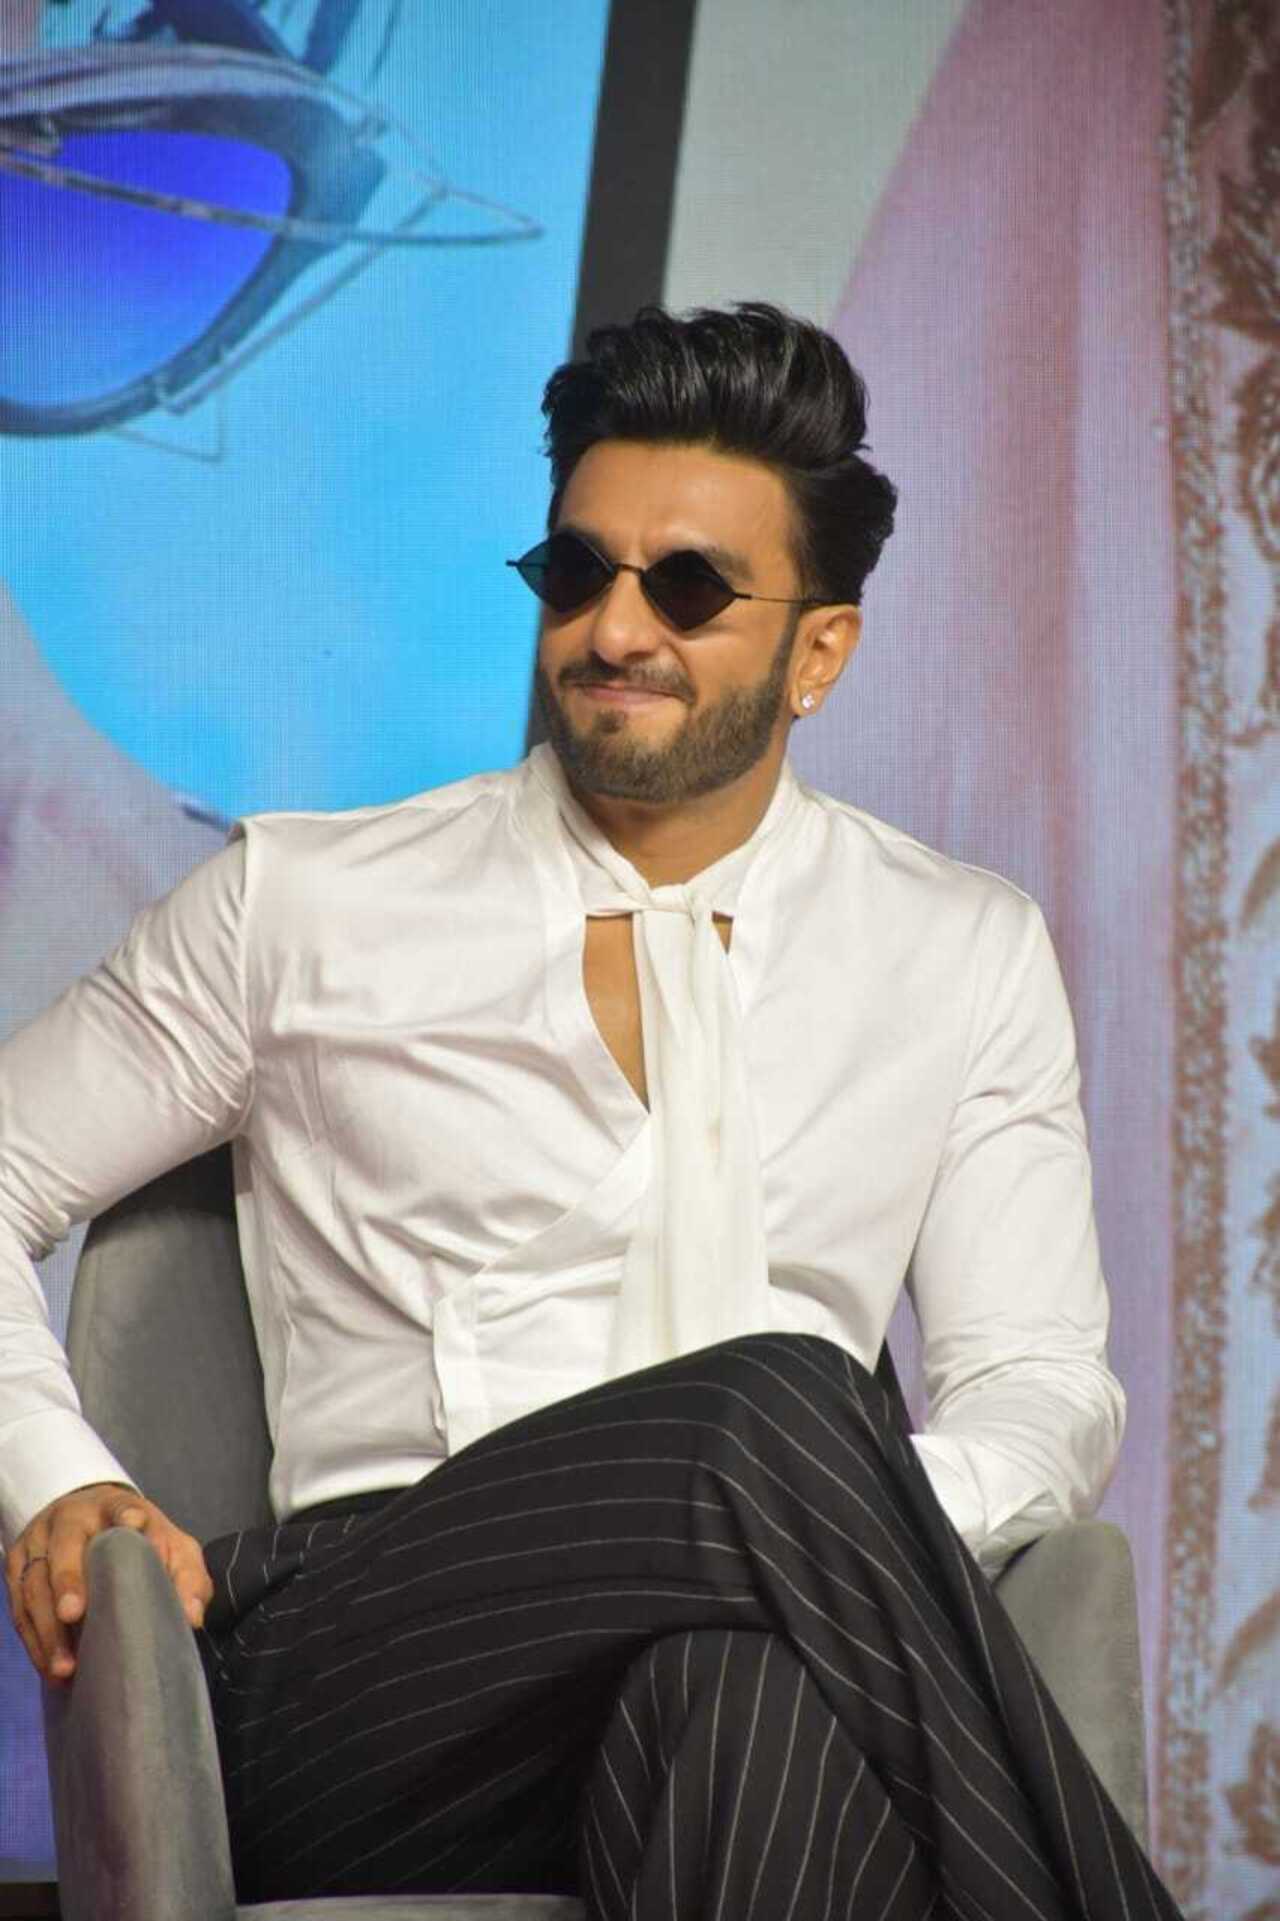 Ranveer Singh AKA Rocky wore a stylish white shirt with black striped pants